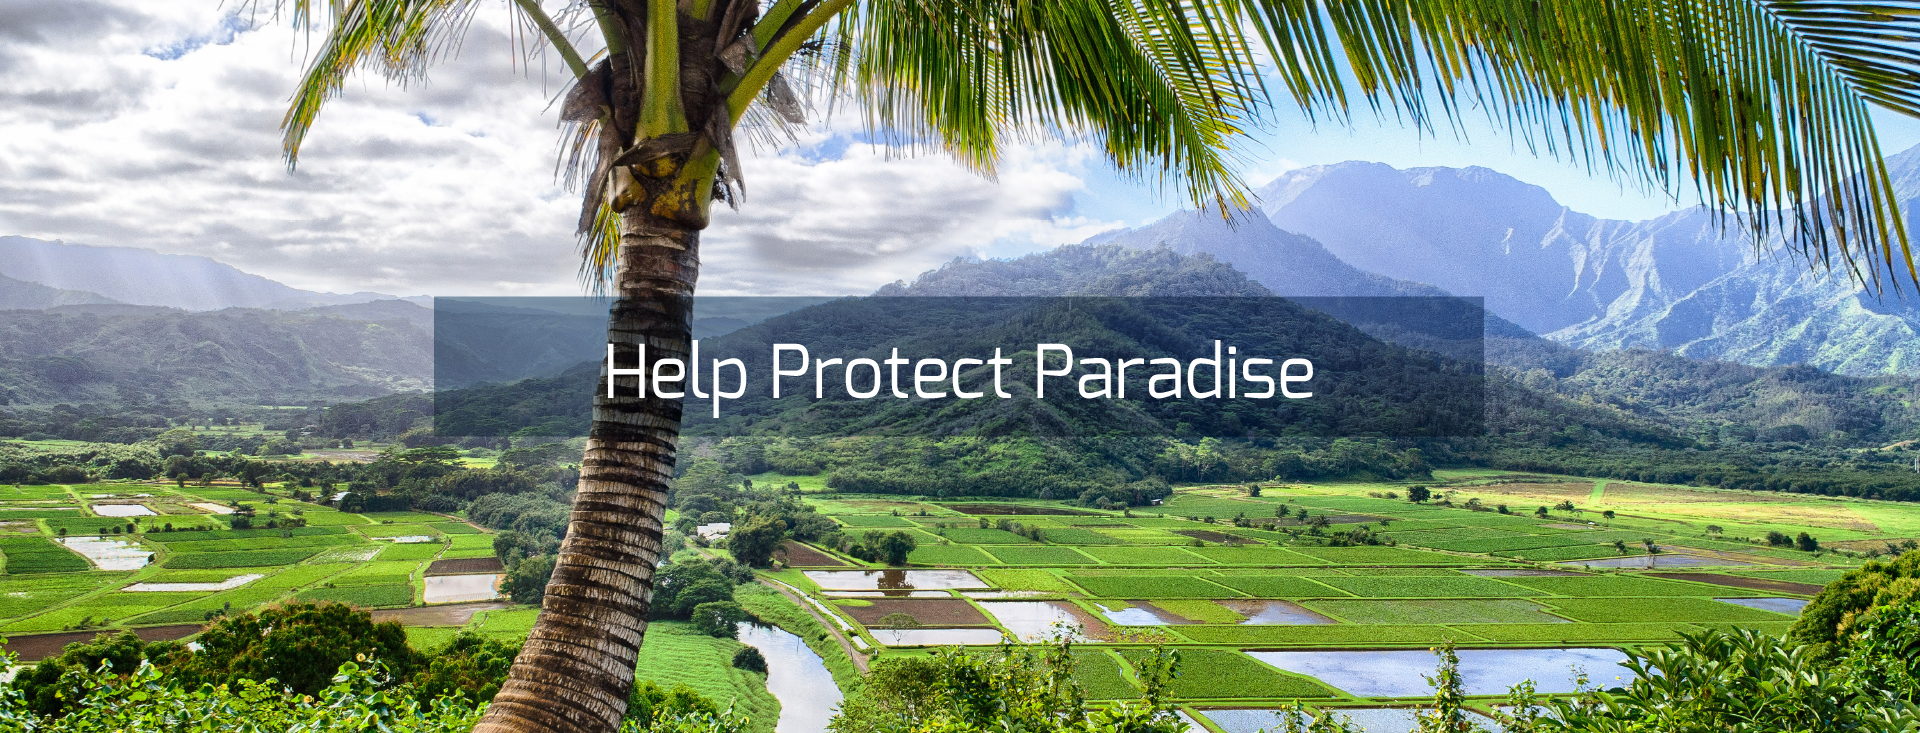 Help Protect Paradise